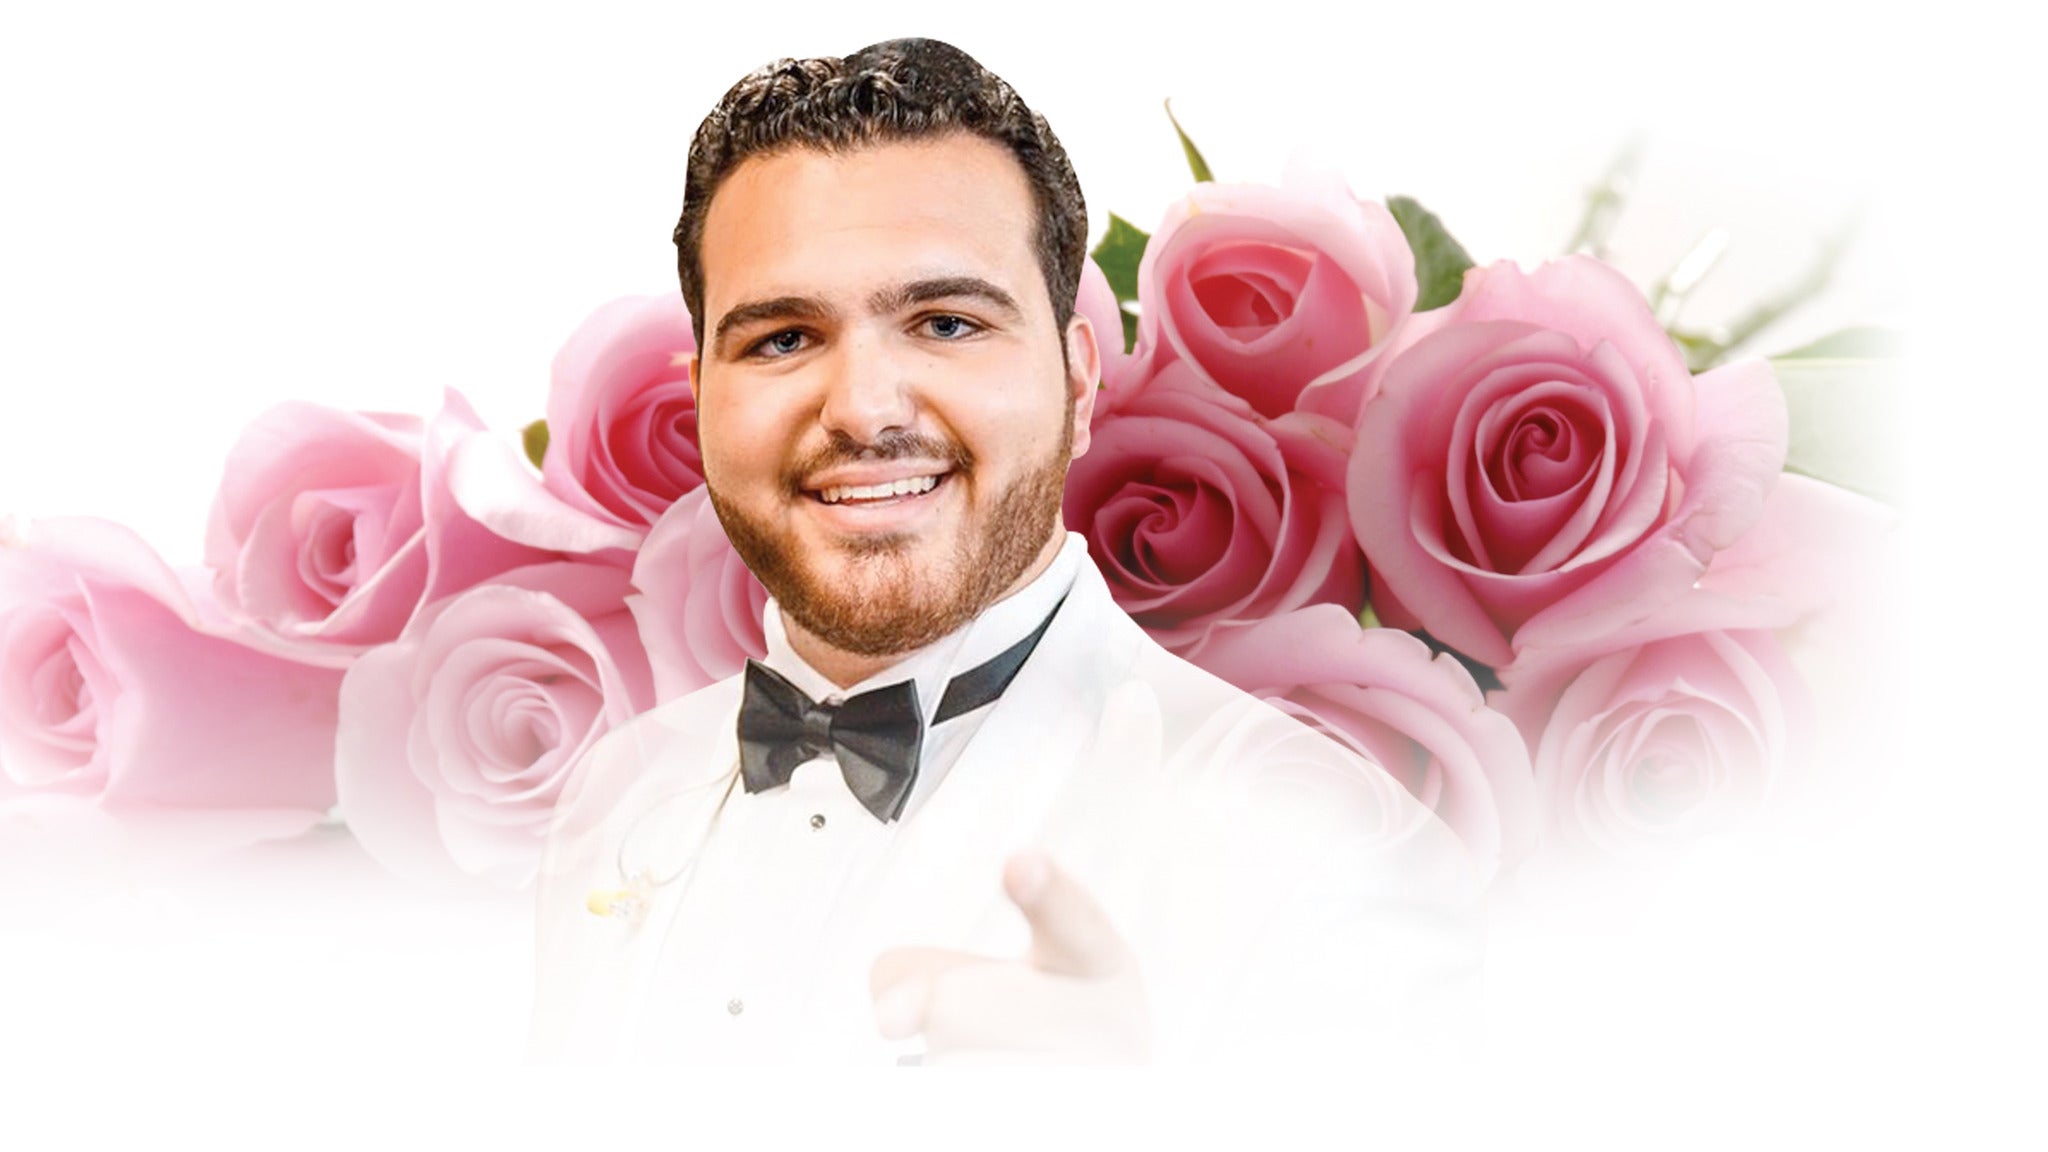 Sal "The Voice" Valentinetti in Englewood promo photo for Member presale offer code